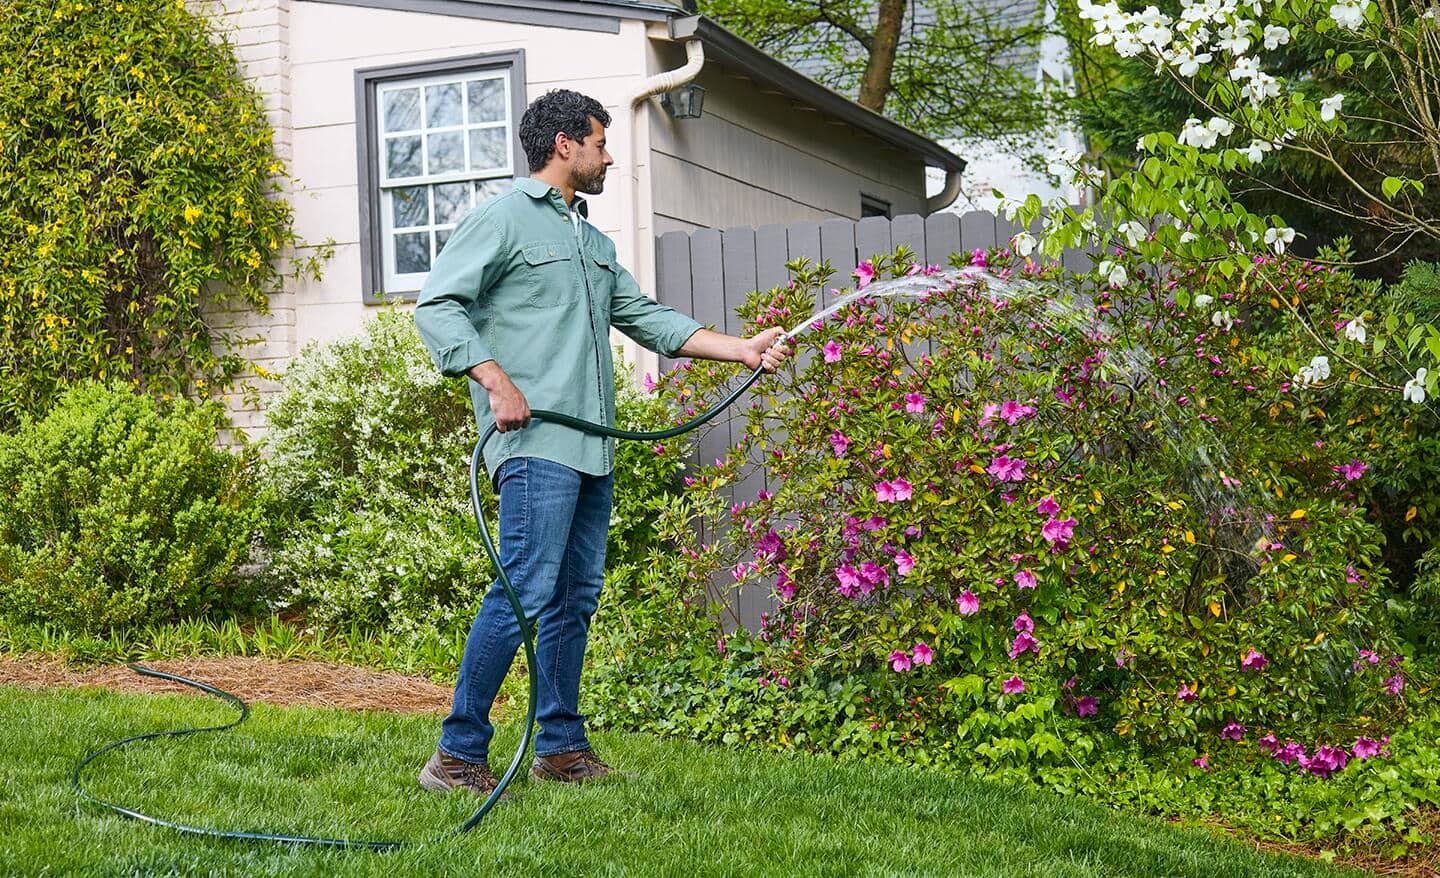 Man holding a hose and watering shrubs and lawn